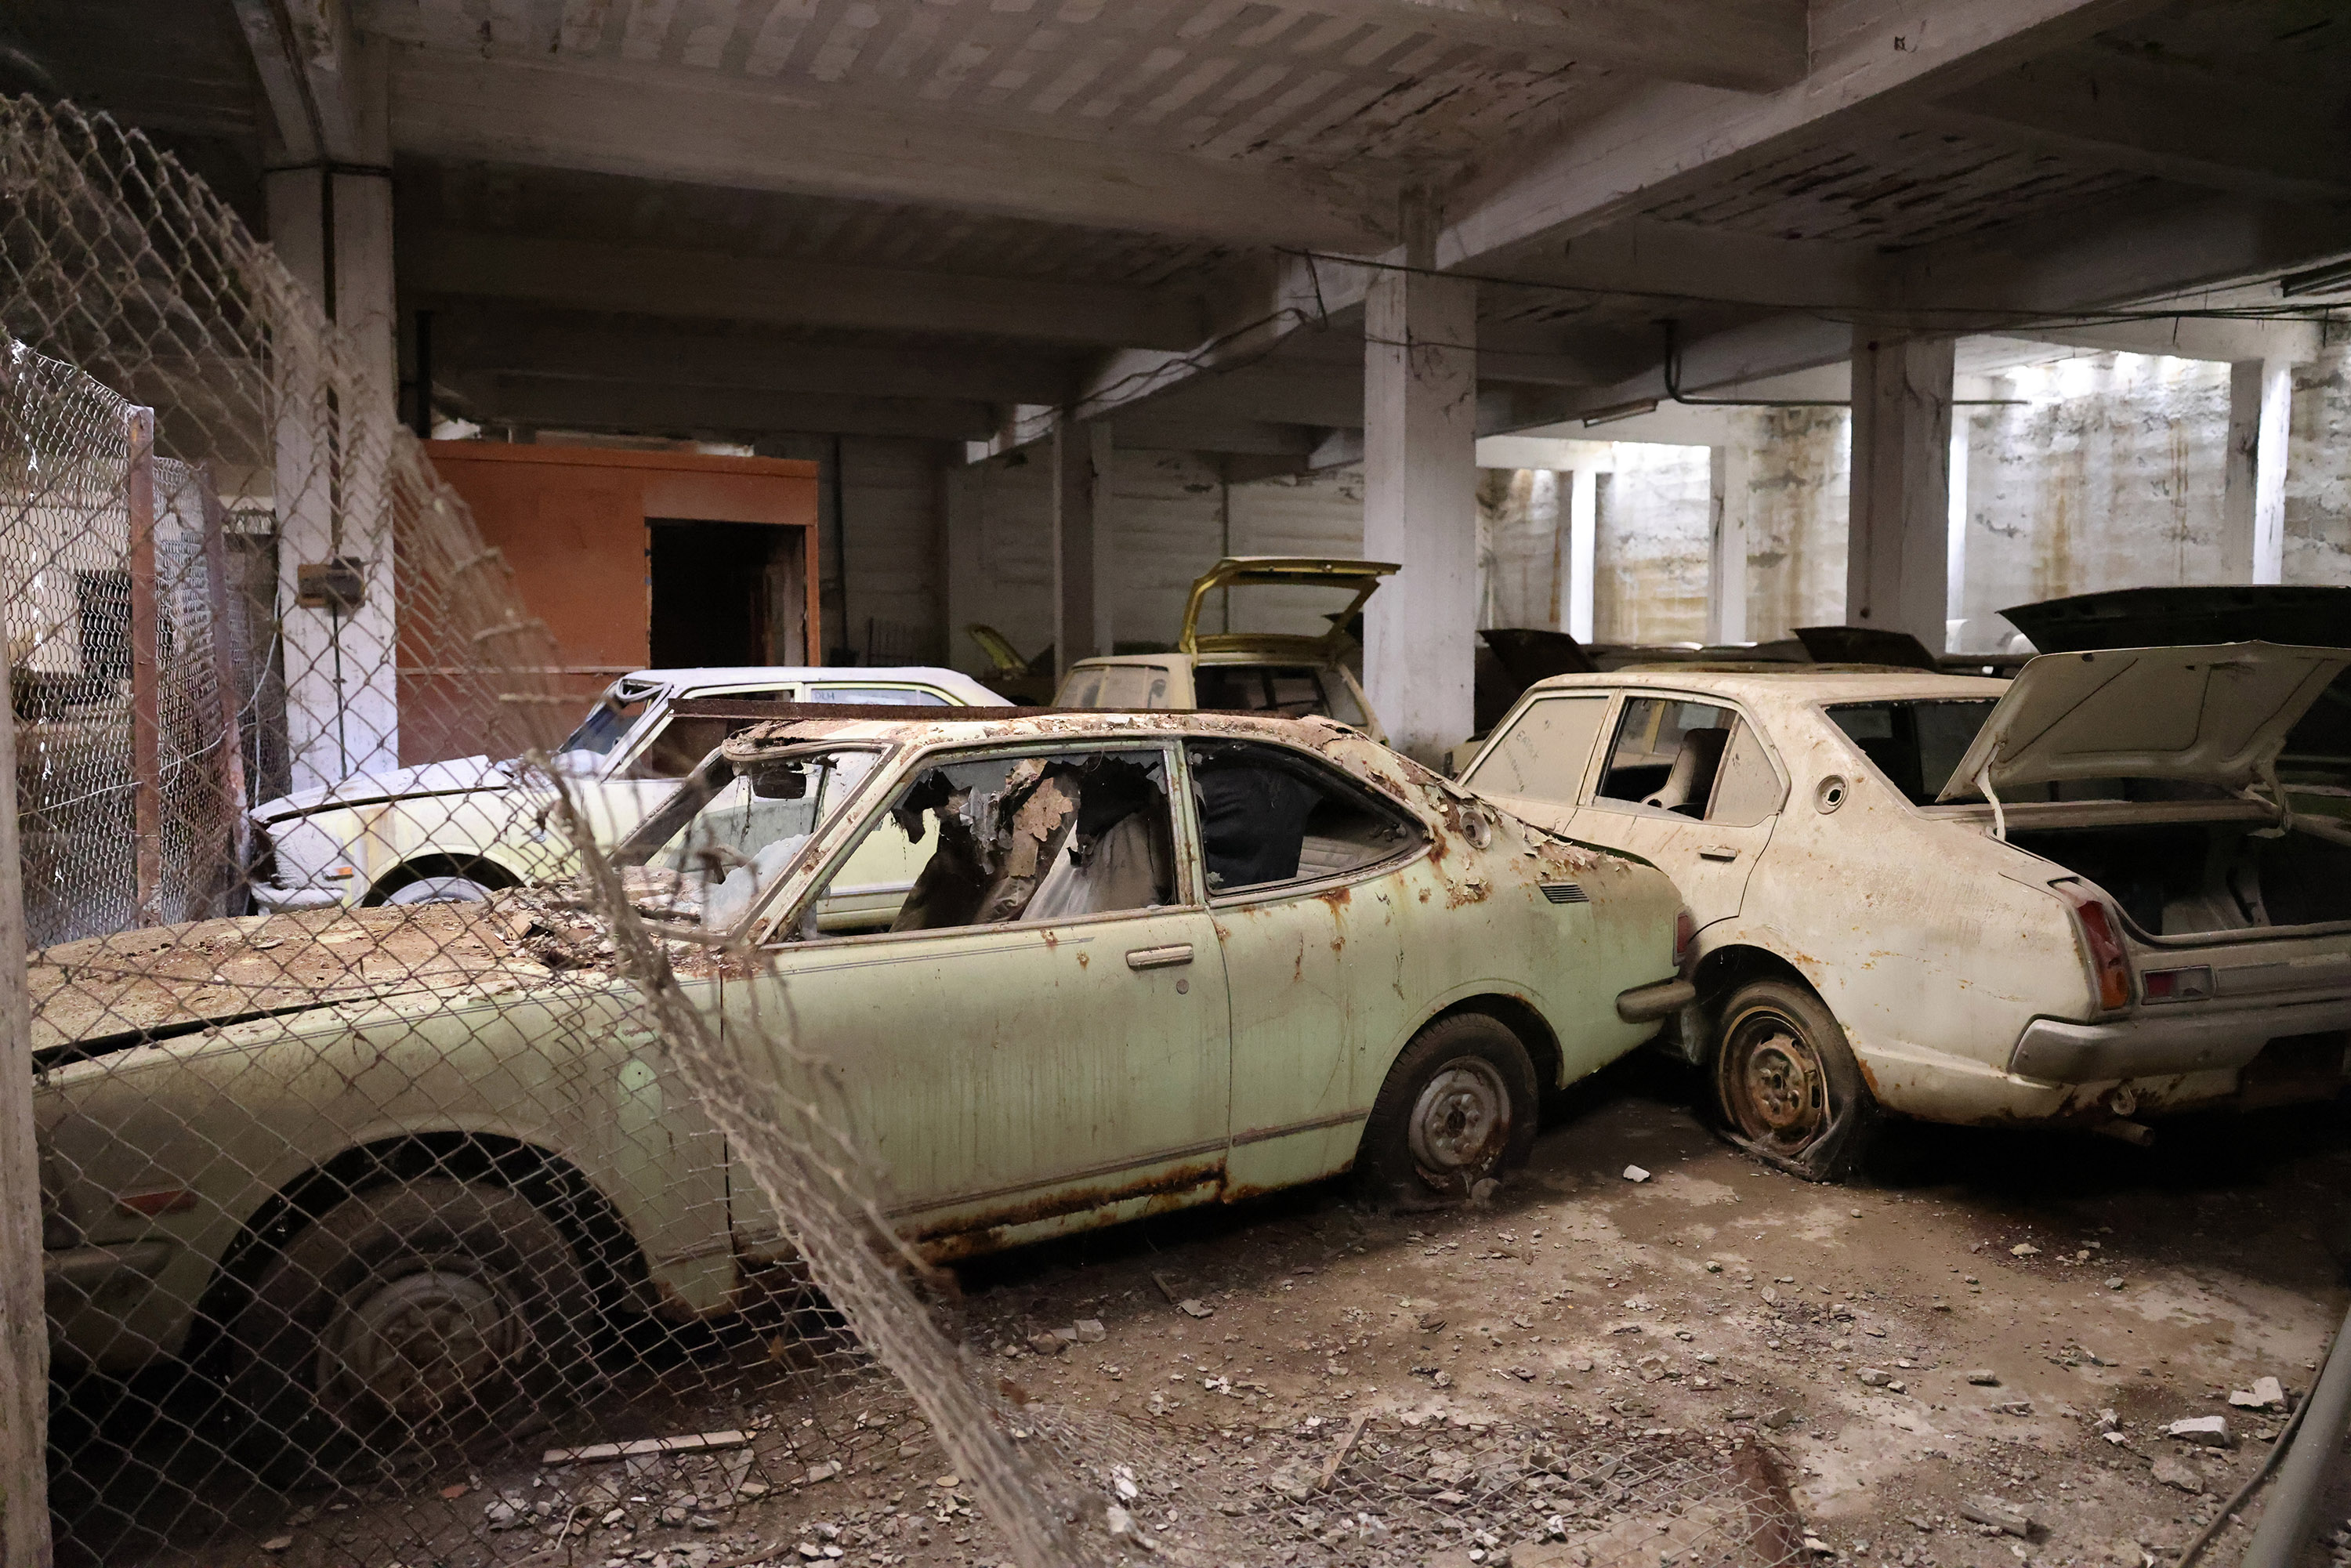 image ‘Brand-new’ 50-year-old cars decaying in buffer zone (Video)